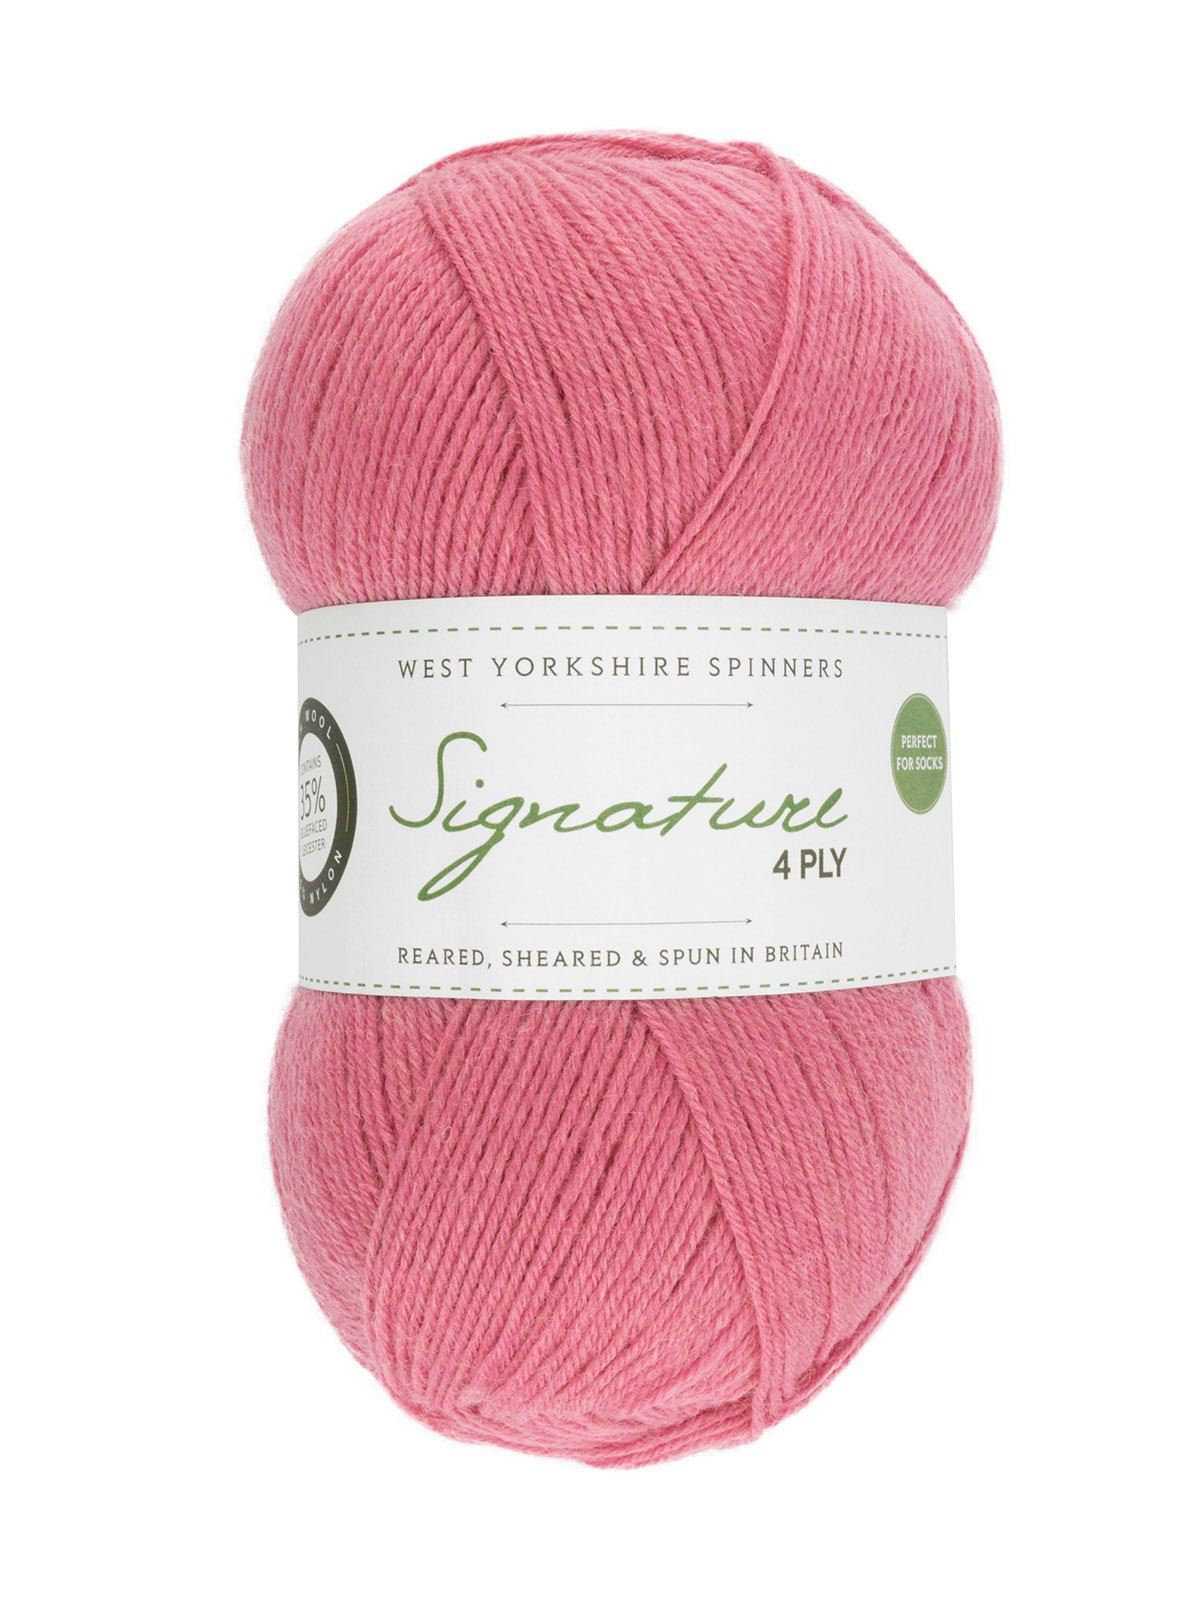 SIGNATURE 4PLY 234-Honeysuckle - West Yorkshire Spinners